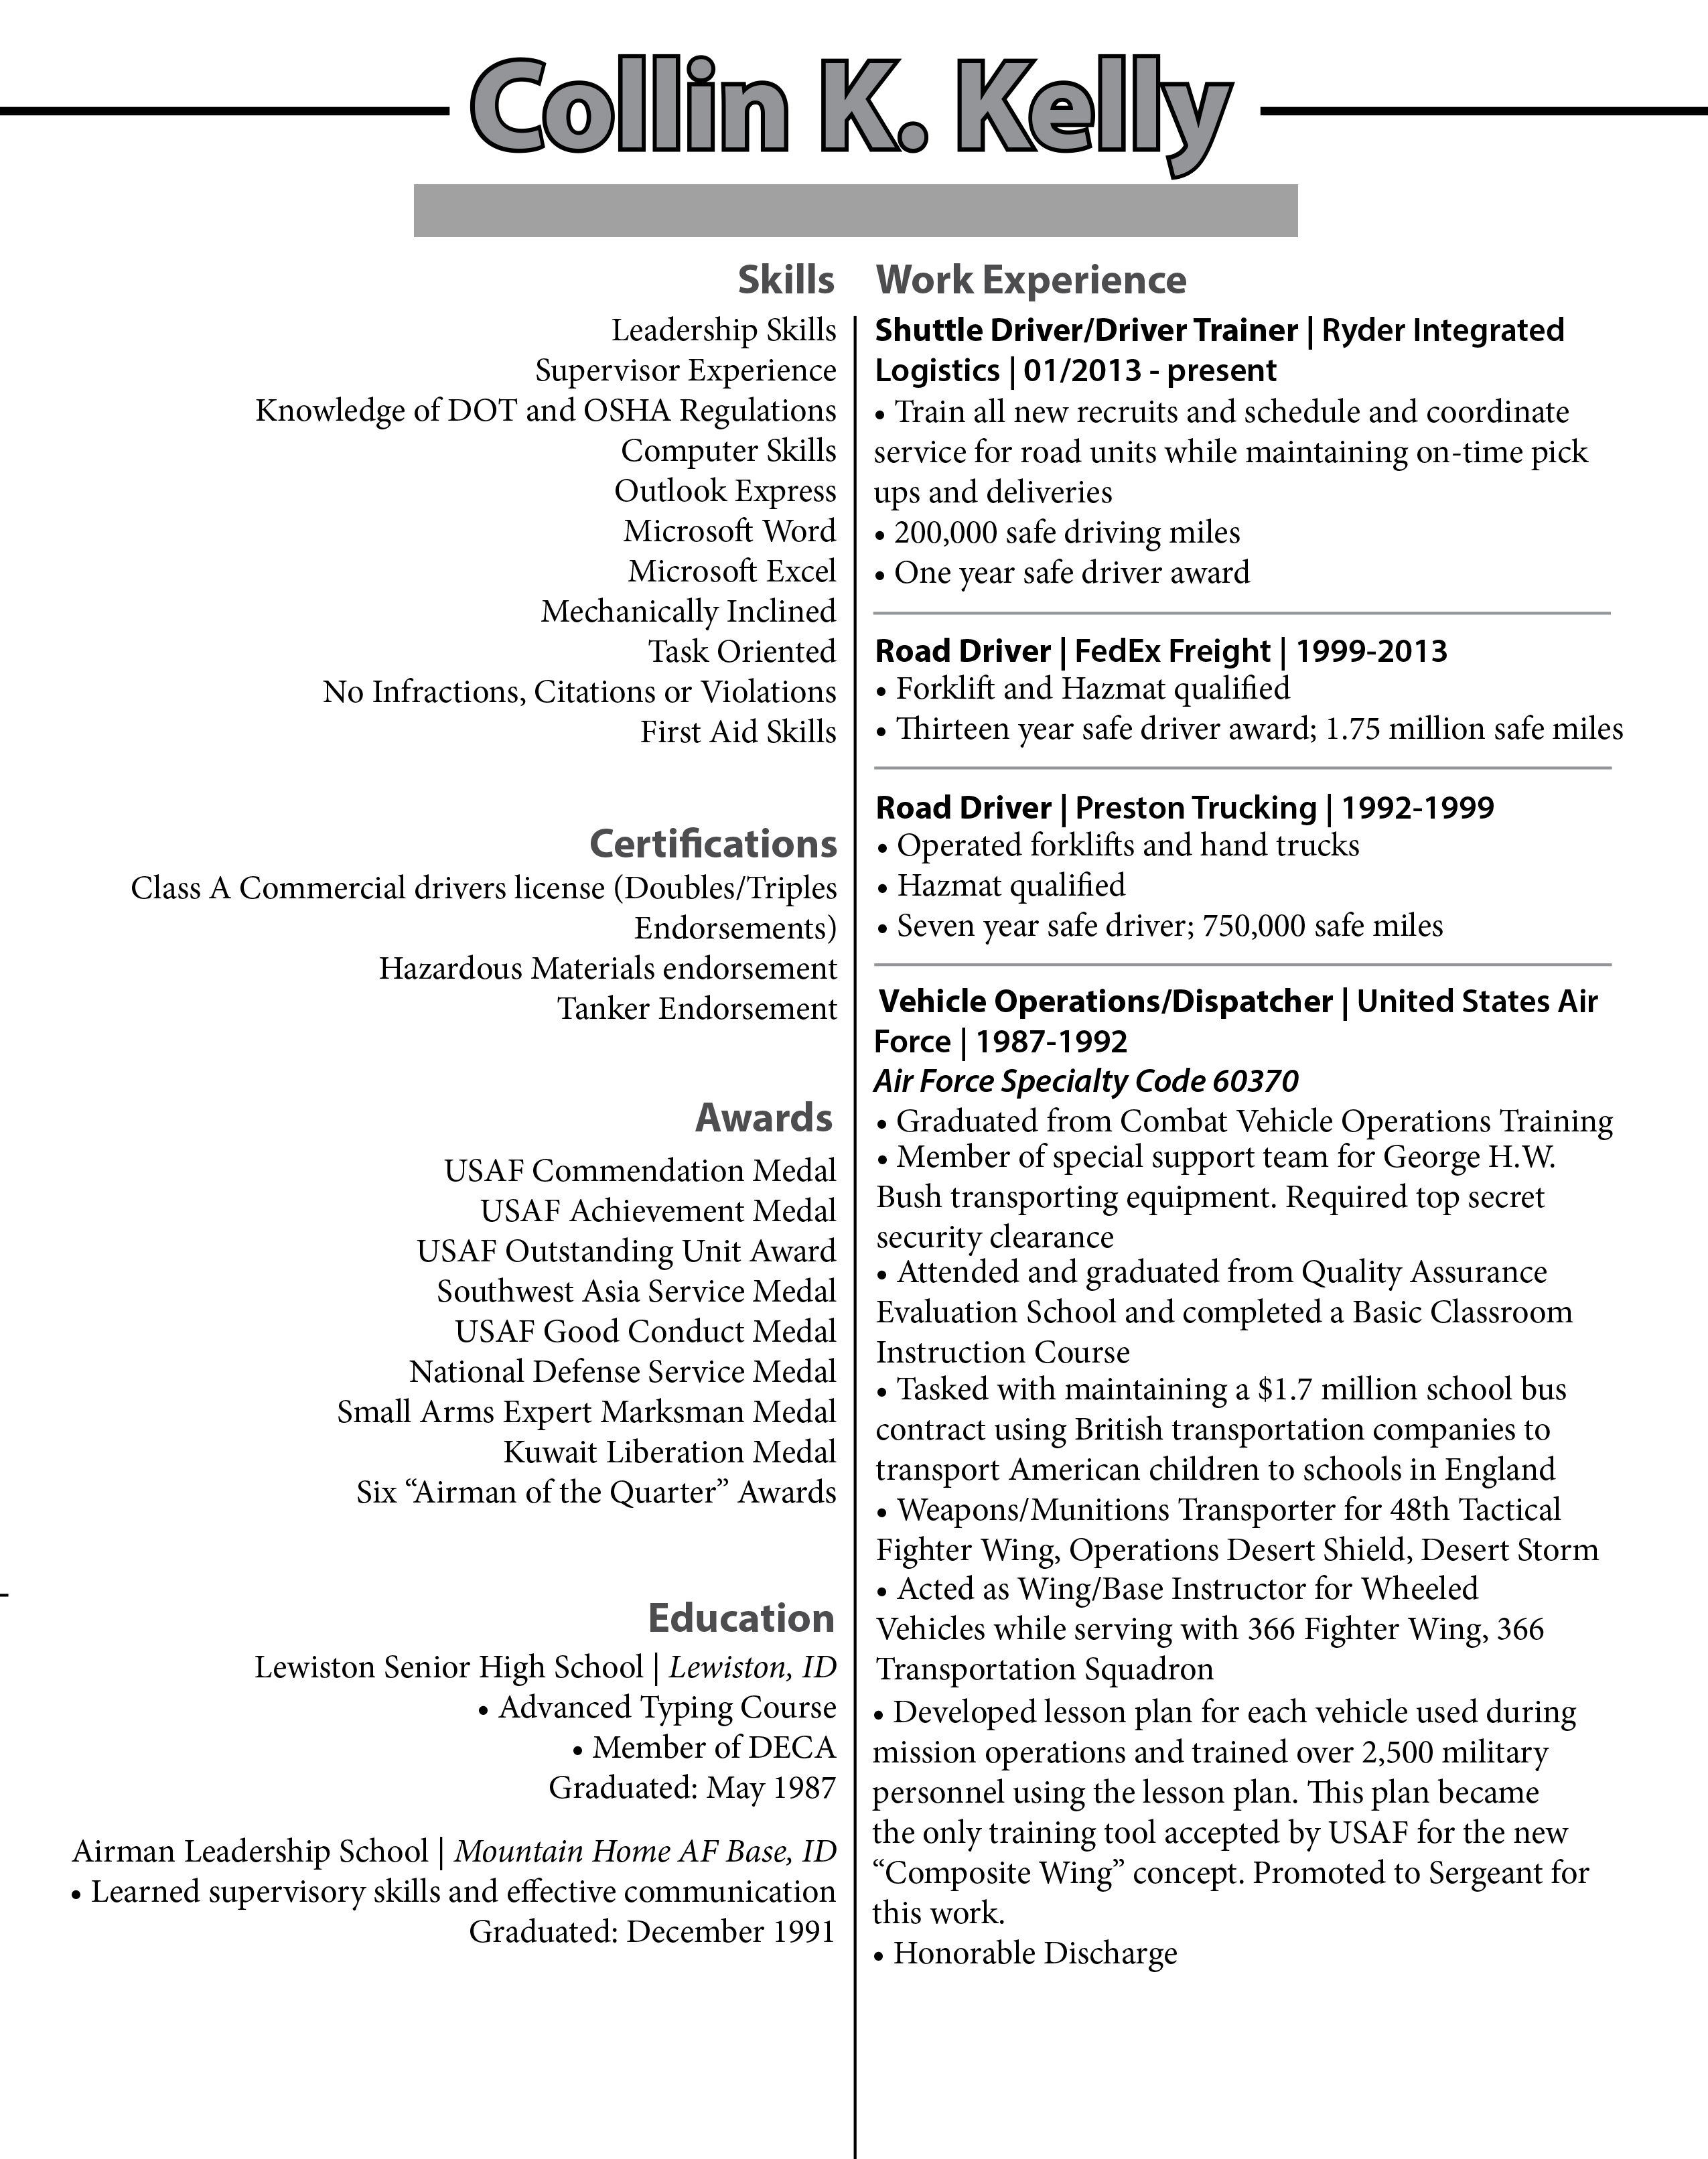 Skill section of resume